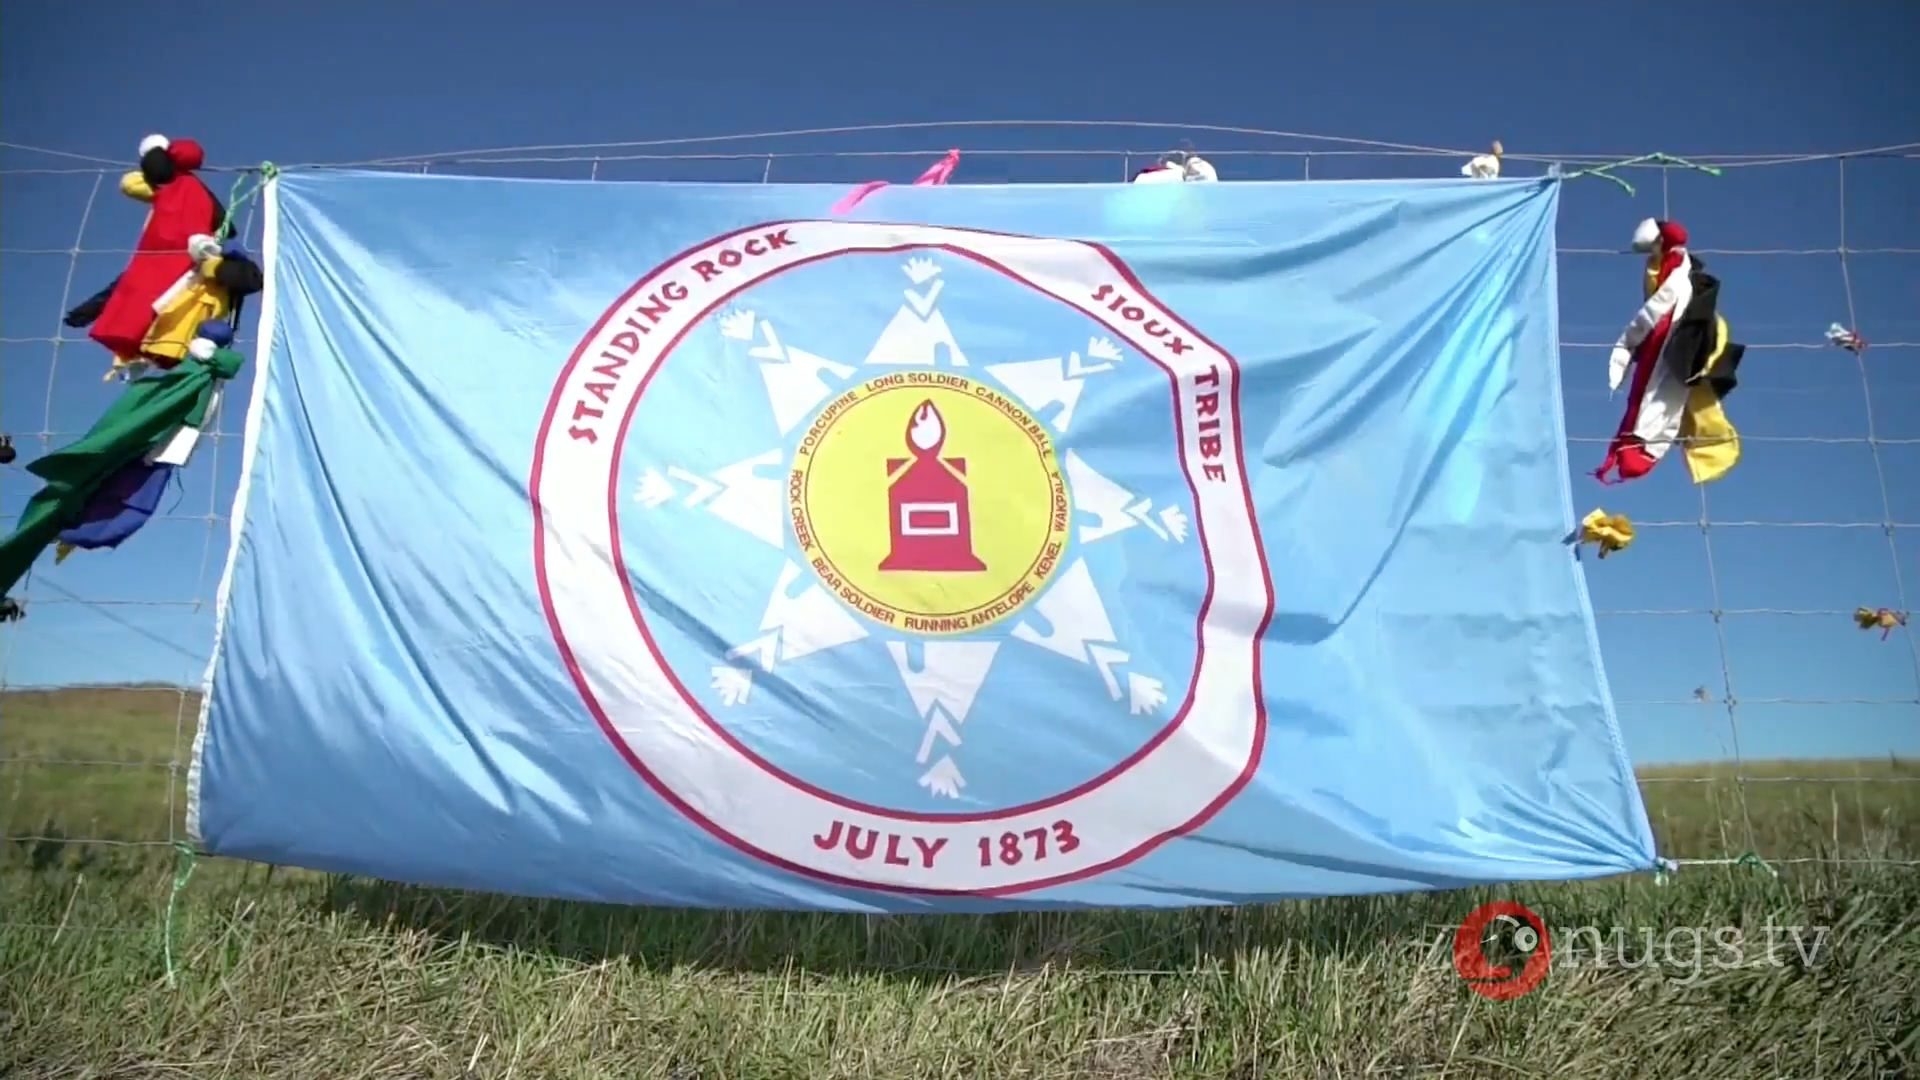 Standing Rock flag. Photo by: Nugs.tv / YouTube